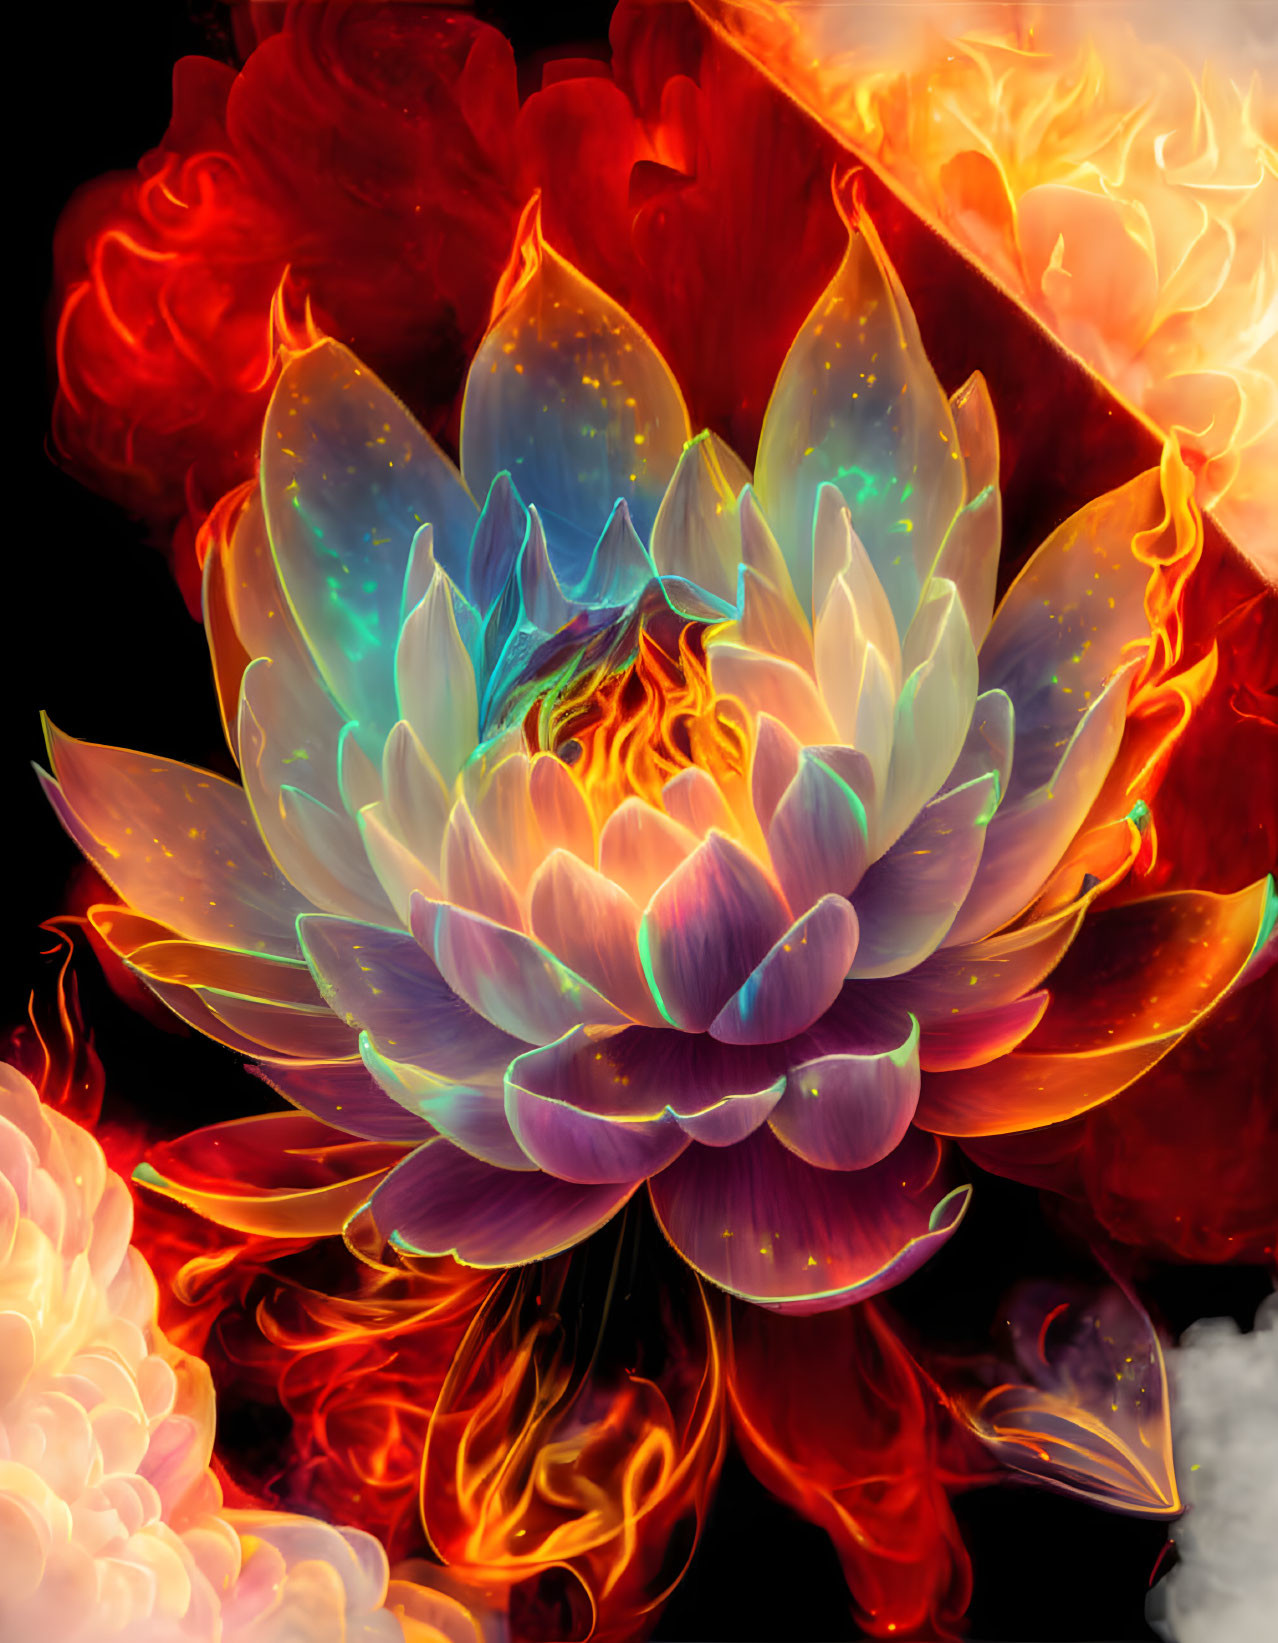 Colorful Digital Artwork of Lotus Flower with Fiery and Teal Tones on Dark Background